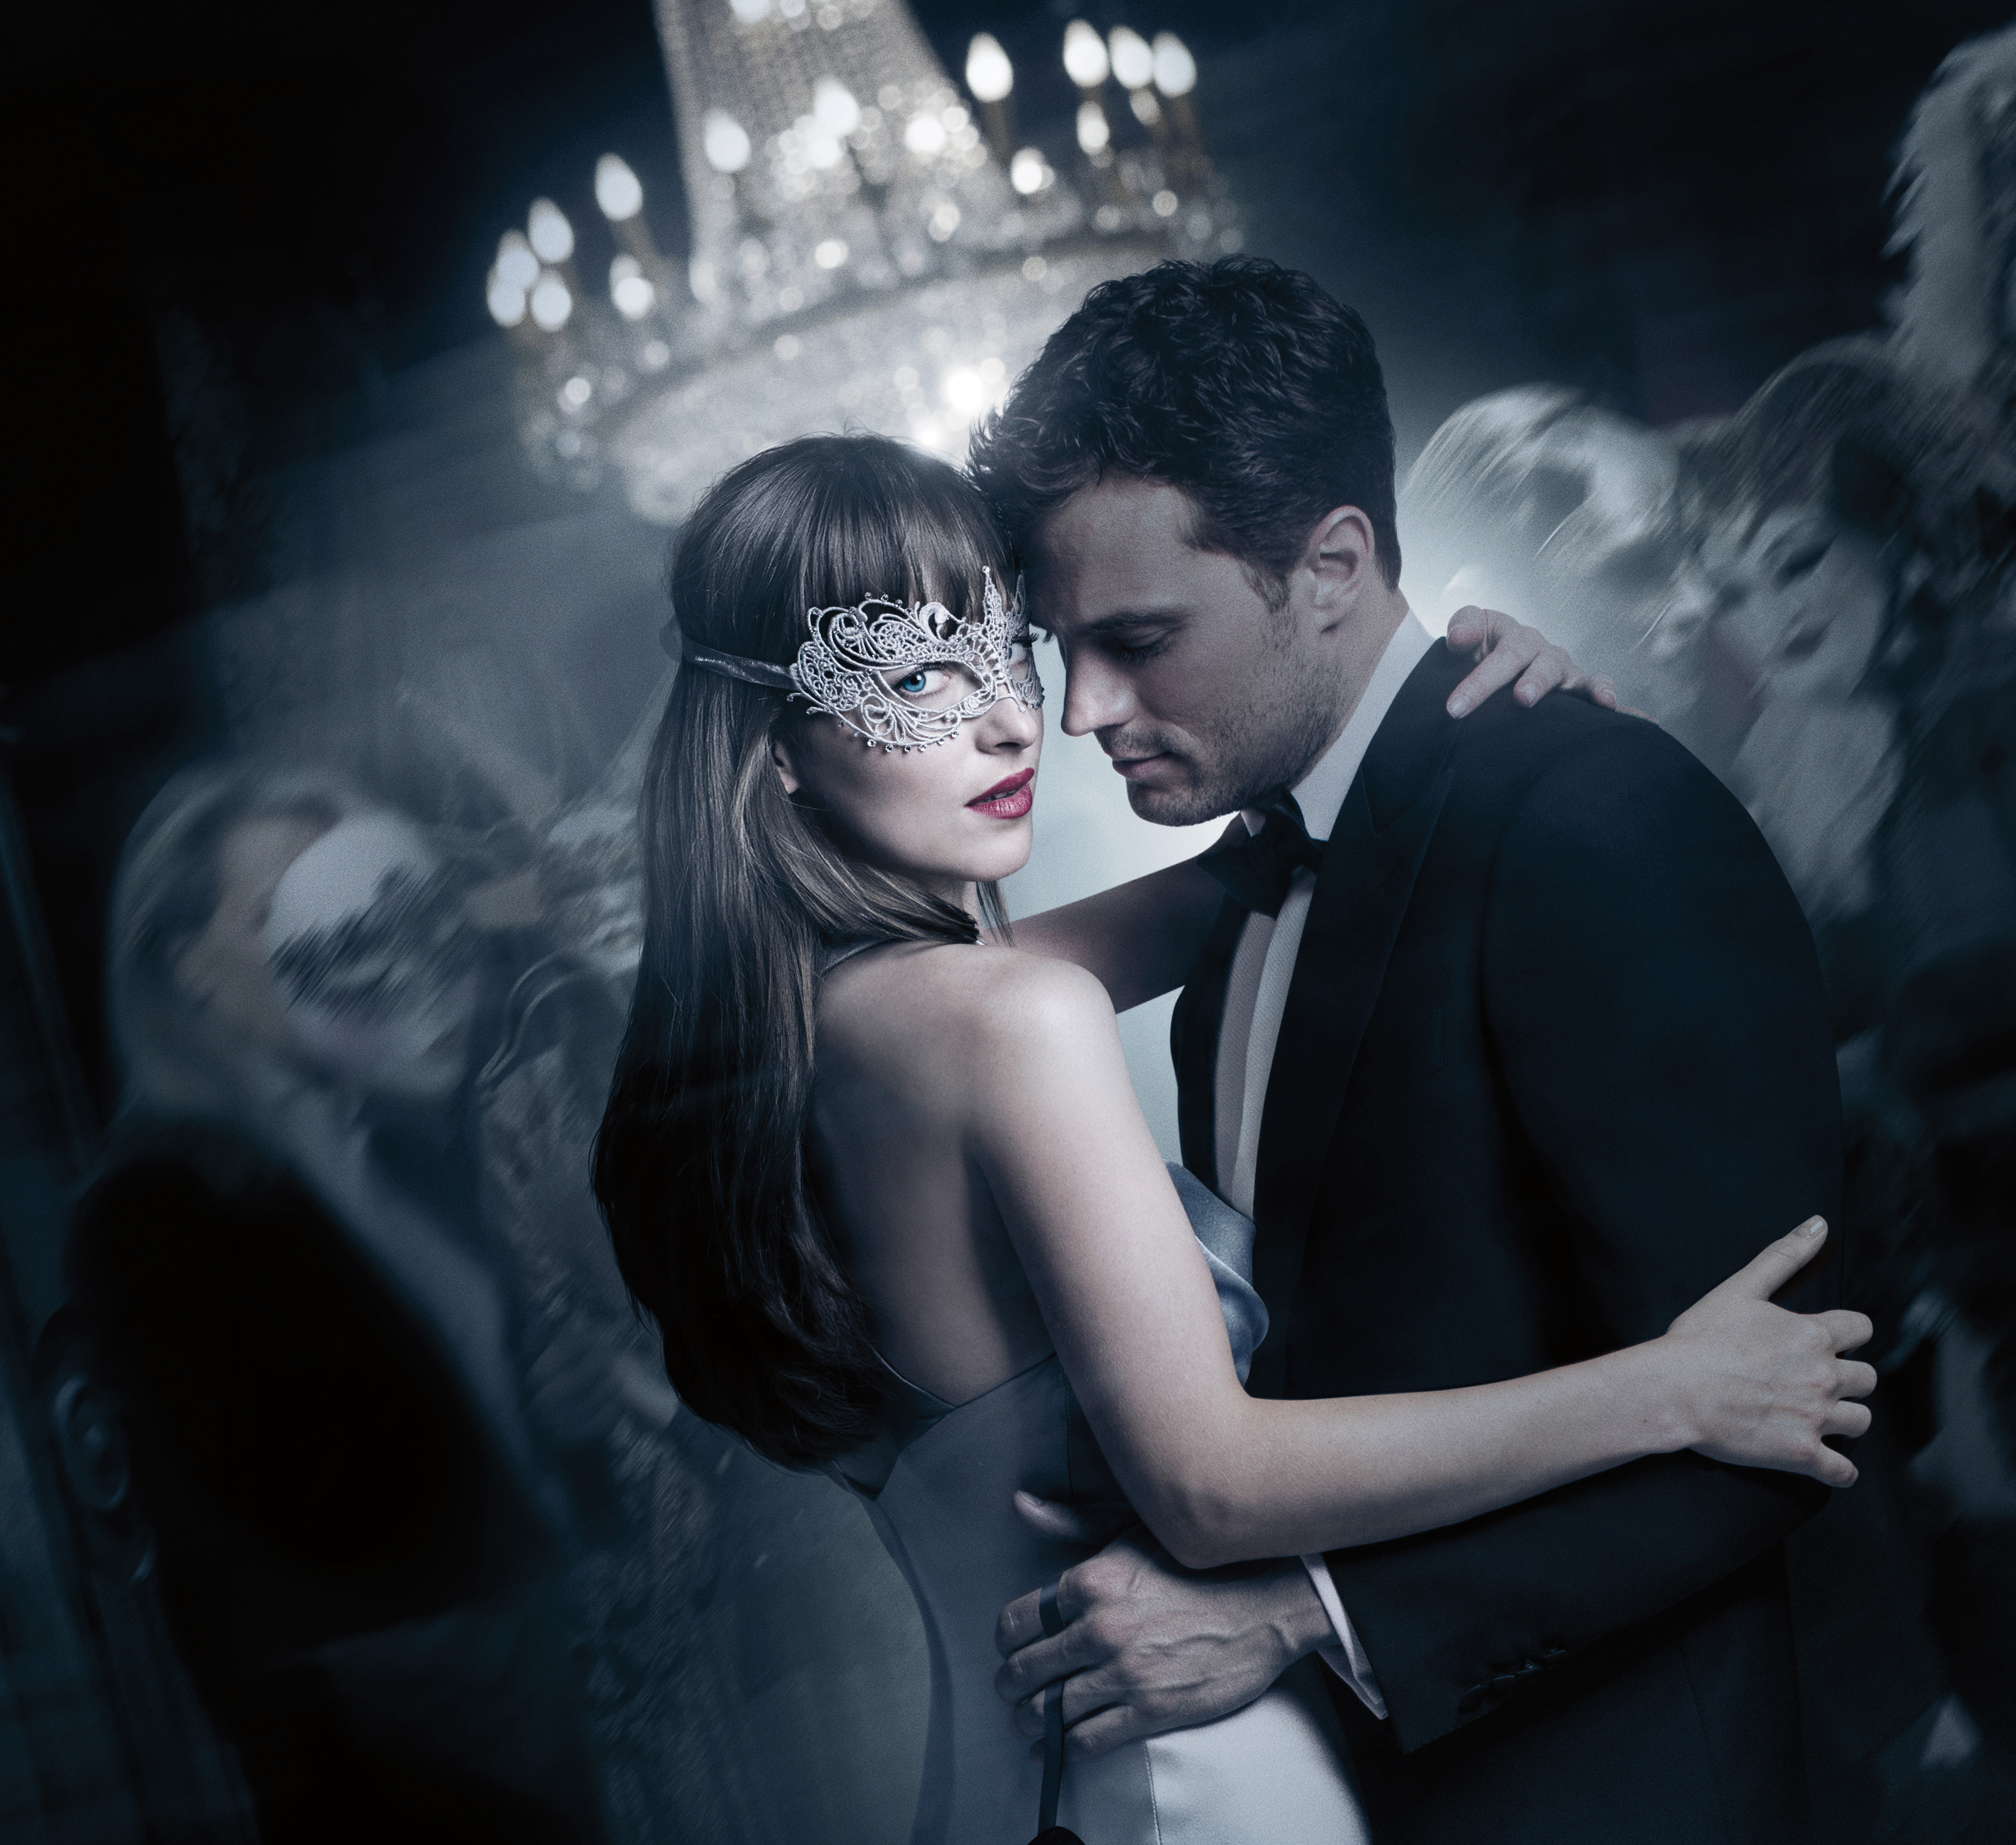 Desktop Mobiles Tablets - Fifty Shades Freed Hd , HD Wallpaper & Backgrounds